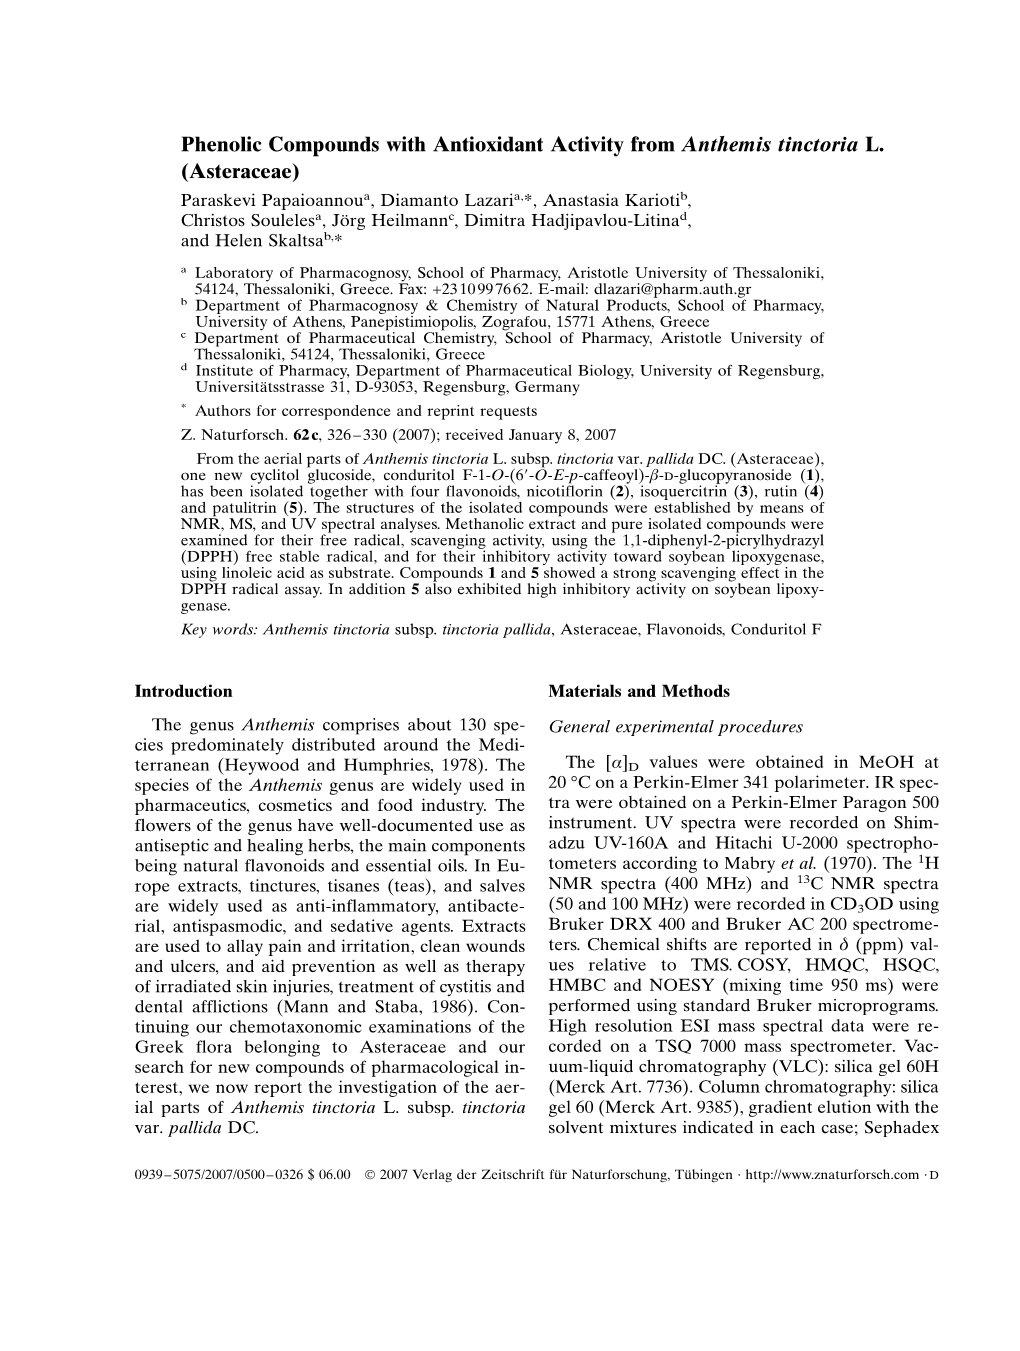 Phenolic Compounds with Antioxidant Activity from Anthemis Tinctoria L